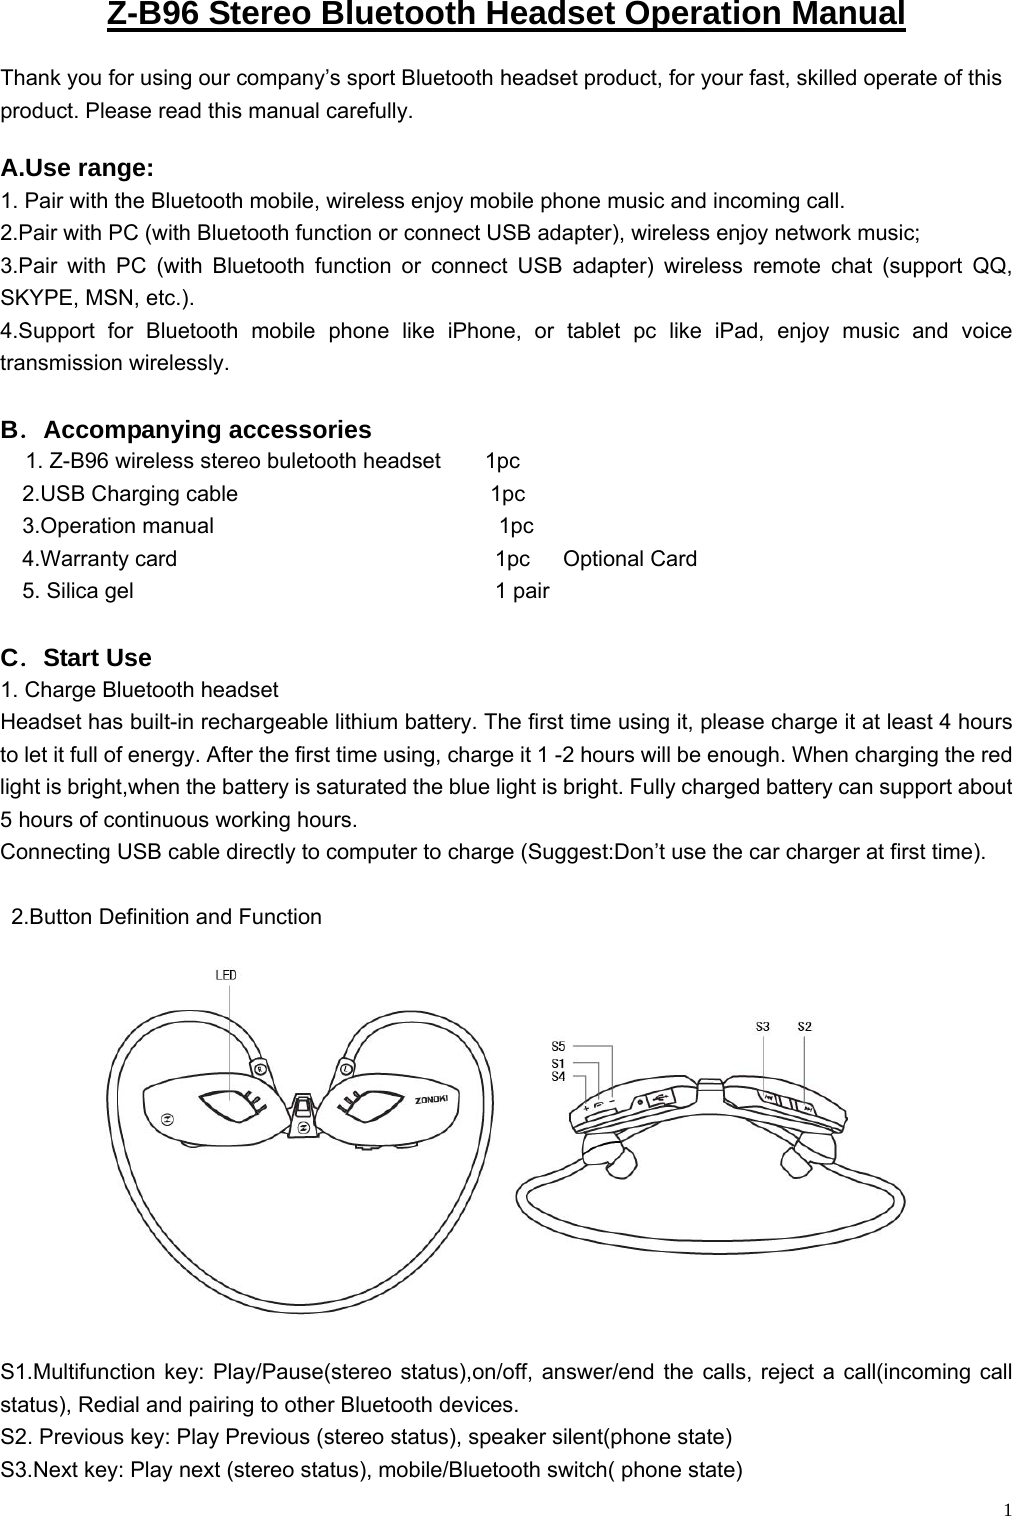    1Z-B96 Stereo Bluetooth Headset Operation Manual Thank you for using our company’s sport Bluetooth headset product, for your fast, skilled operate of this product. Please read this manual carefully. A.Use range:  1. Pair with the Bluetooth mobile, wireless enjoy mobile phone music and incoming call. 2.Pair with PC (with Bluetooth function or connect USB adapter), wireless enjoy network music;   3.Pair with PC (with Bluetooth function or connect USB adapter) wireless remote chat (support QQ, SKYPE, MSN, etc.). 4.Support for Bluetooth mobile phone like iPhone, or tablet pc like iPad, enjoy music and voice transmission wirelessly.  B．Accompanying accessories   1. Z-B96 wireless stereo buletooth headset    1pc   2.USB Charging cable                       1pc   3.Operation manual                          1pc   4.Warranty card                             1pc   Optional Card    5. Silica gel                                 1 pair   C．Start Use 1. Charge Bluetooth headset Headset has built-in rechargeable lithium battery. The first time using it, please charge it at least 4 hours to let it full of energy. After the first time using, charge it 1 -2 hours will be enough. When charging the red light is bright,when the battery is saturated the blue light is bright. Fully charged battery can support about 5 hours of continuous working hours. Connecting USB cable directly to computer to charge (Suggest:Don’t use the car charger at first time).    2.Button Definition and Function   S1.Multifunction key: Play/Pause(stereo status),on/off, answer/end the calls, reject a call(incoming call status), Redial and pairing to other Bluetooth devices. S2. Previous key: Play Previous (stereo status), speaker silent(phone state) S3.Next key: Play next (stereo status), mobile/Bluetooth switch( phone state) 